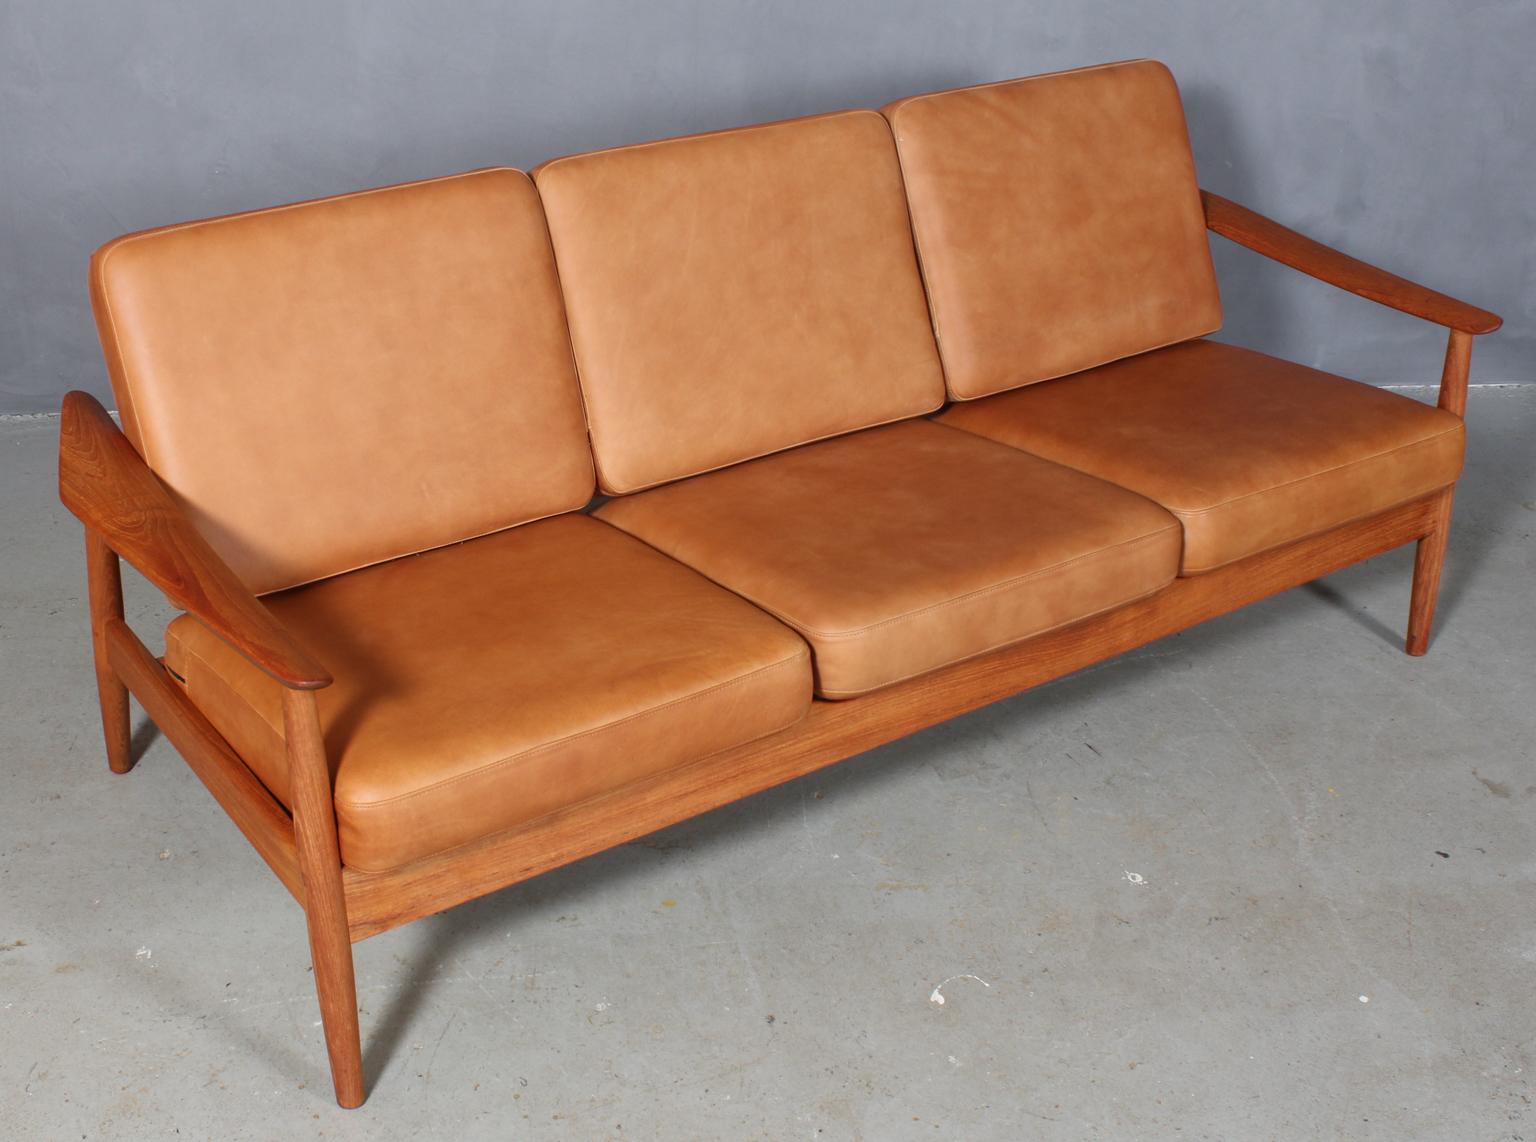 Arne Vodder three-seat sofa with teak frame and organic armrests.

New upholstered with tan aniline Vintage leather.

Model 165/3, made by France & Son.